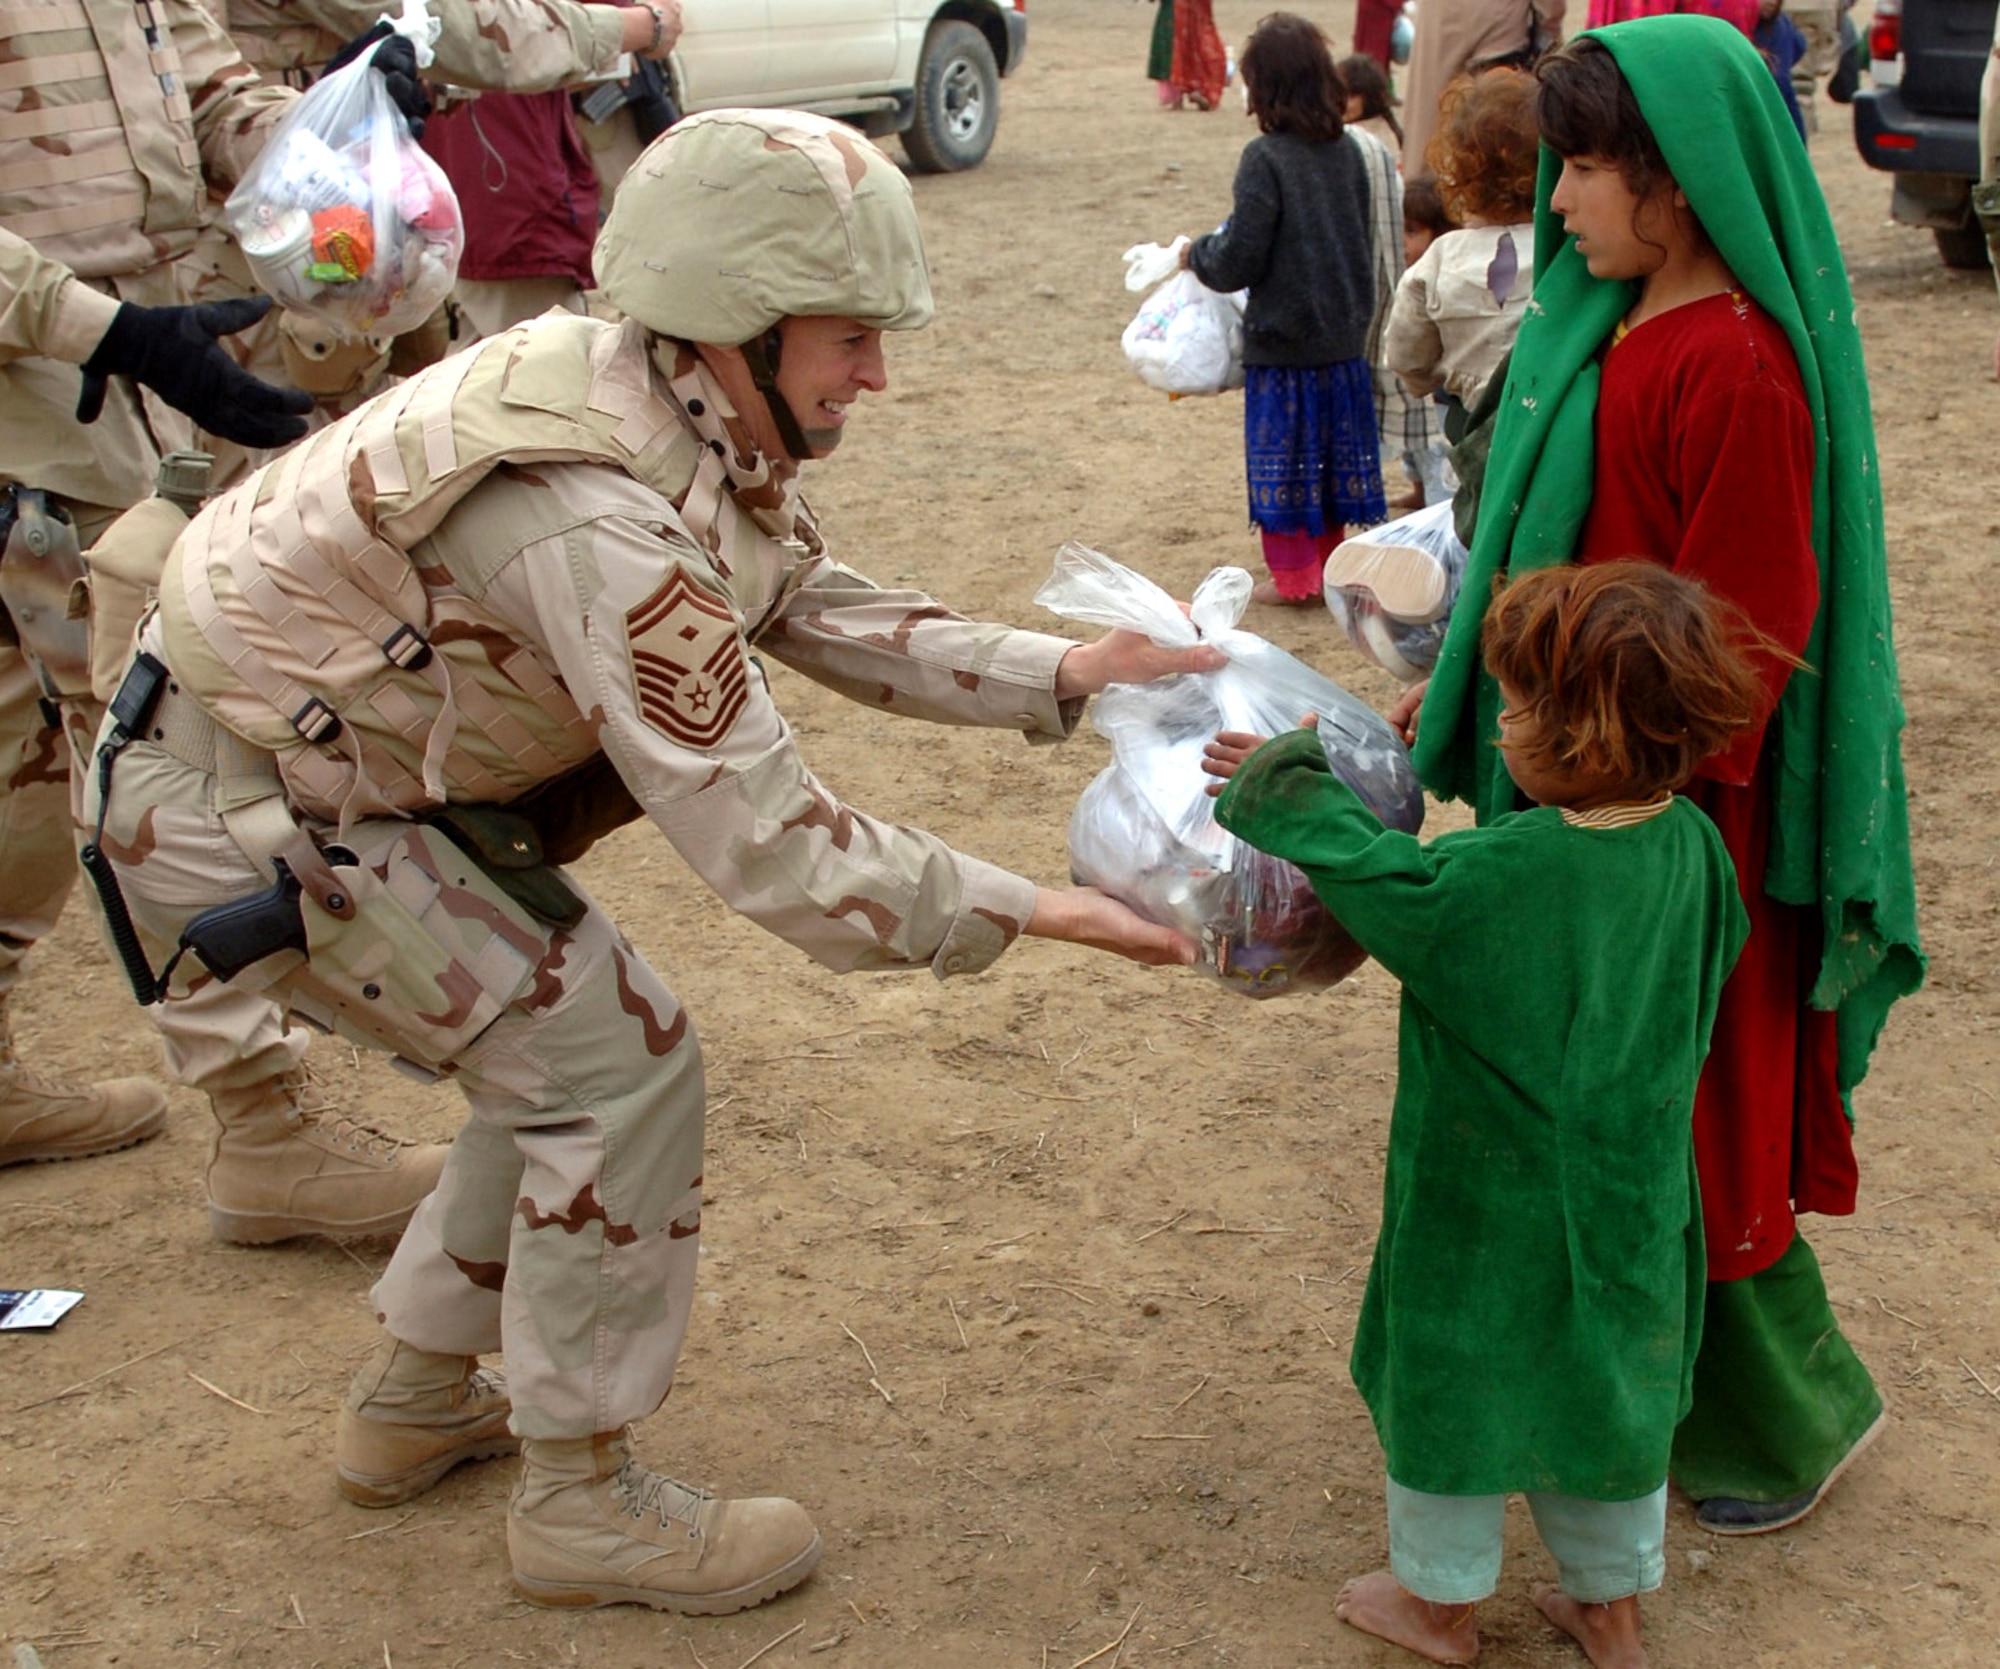 Senior Master Sgt. Diana Brown gives clothes to two Afghan girls during a recent Adopt-A-Village visit in Parwan Province, Afghanistan. More than 40 Airmen participated in giving the village of Gadia more than 400 bags of clothes, hygiene items and school supplies. Sergeant Brown is the 455th Expeditionary Aircraft Maintenance Squadron first sergeant at Bagram Air Base, Afghanistan. She is deployed from the Ohio Air National Guard's 179th Airlift Wing. (U.S. Air Force photo/Staff Sgt. Jennifer Redente) 